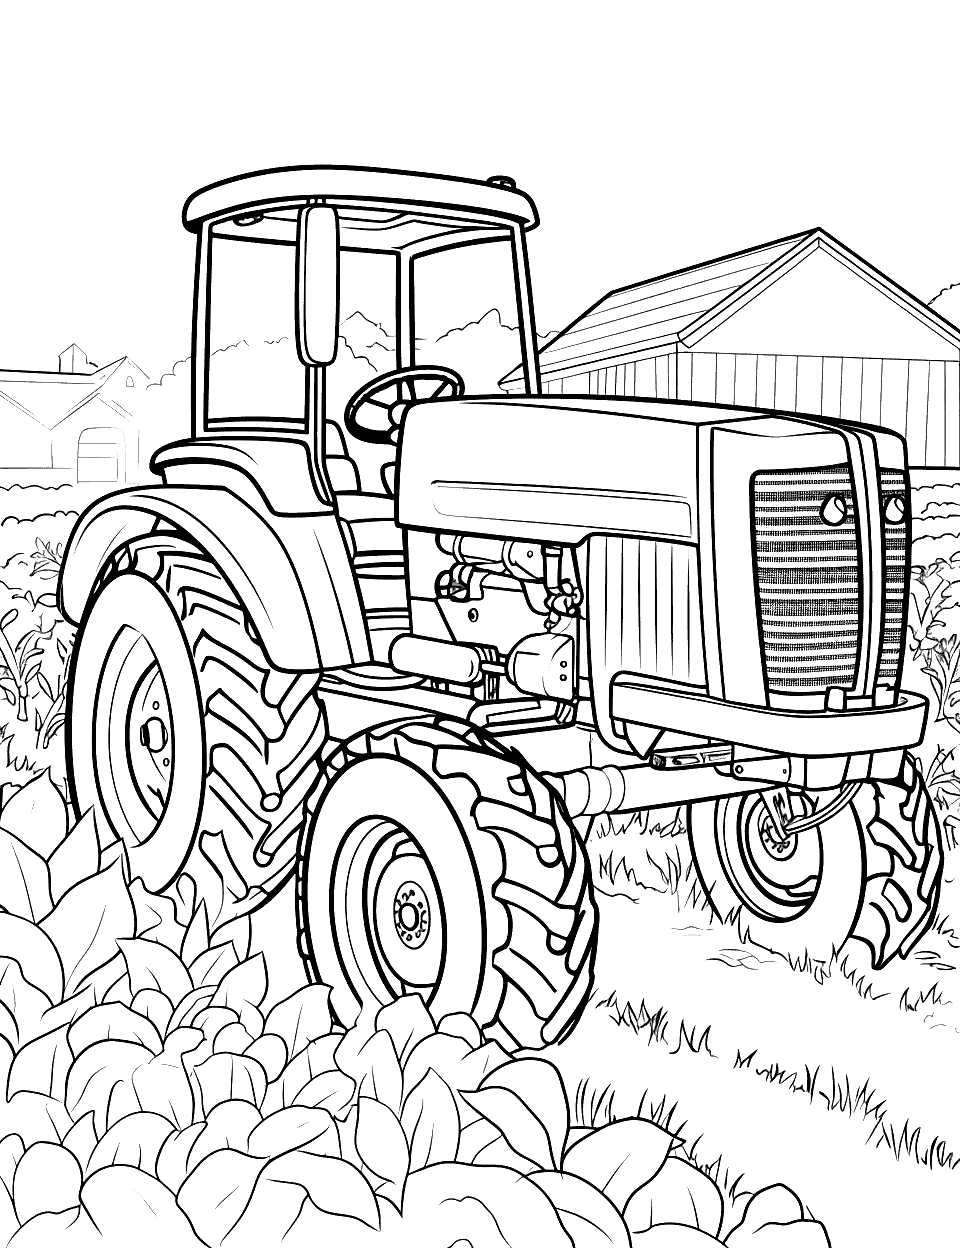 Small Tractor in a Vegetable Patch Coloring Page - A compact tractor working in a lush vegetable garden.